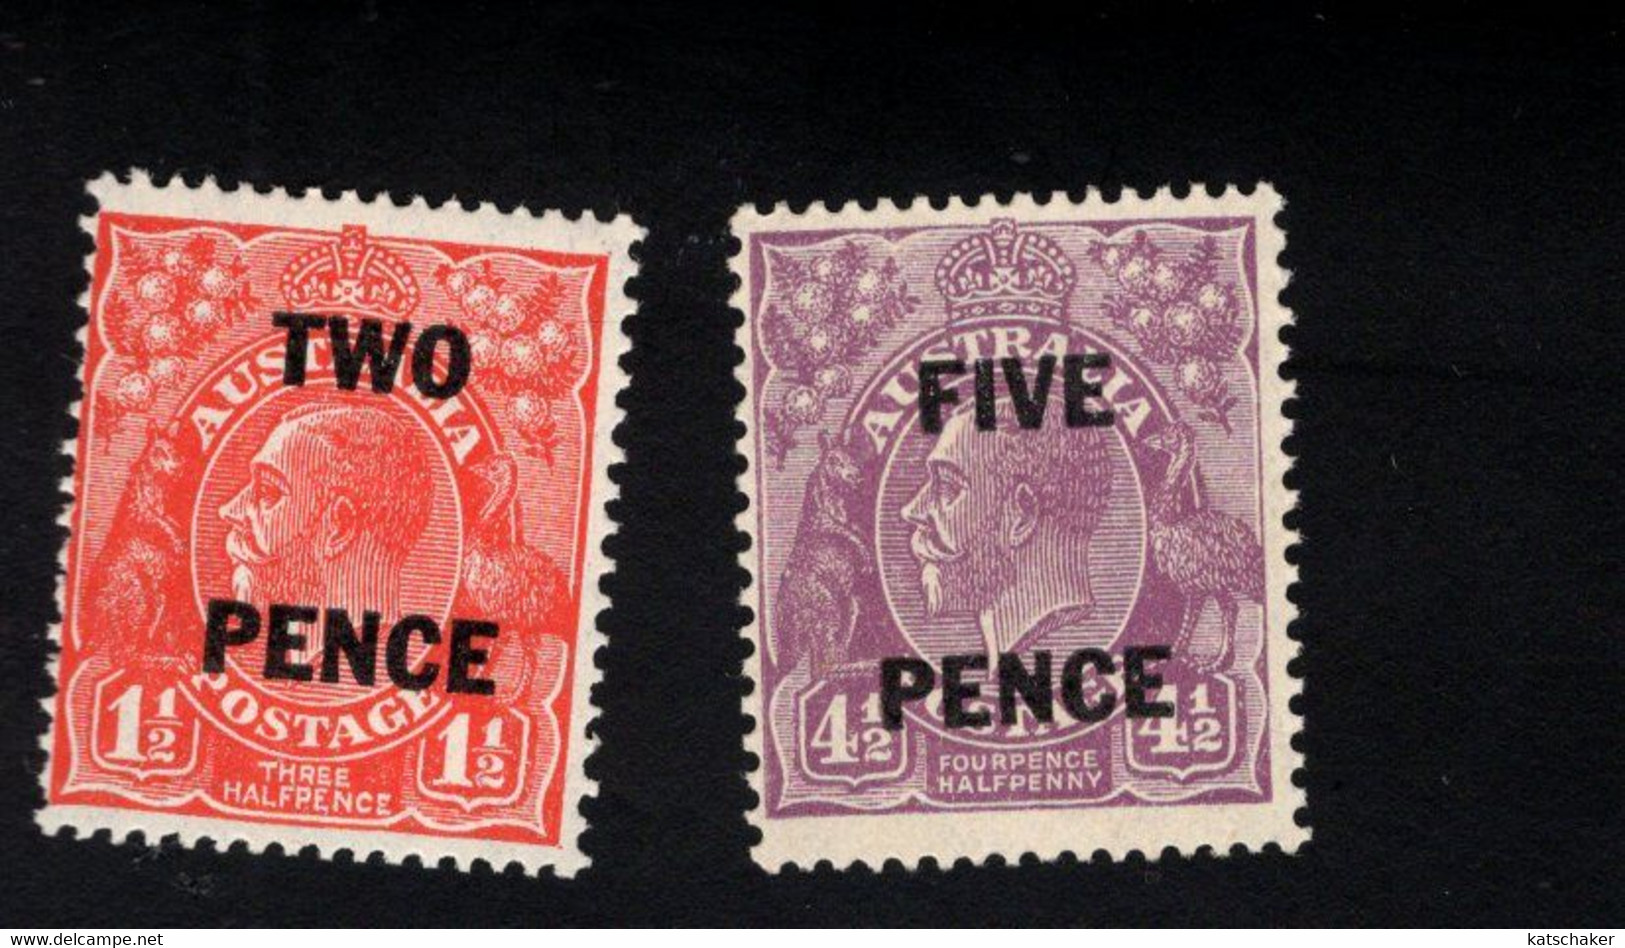 1371726605 SCOTT 106 107 (X) SCHARNIER HINGED MIT FALZ -  KING GEORGE V SURCHARGED - Mint Stamps